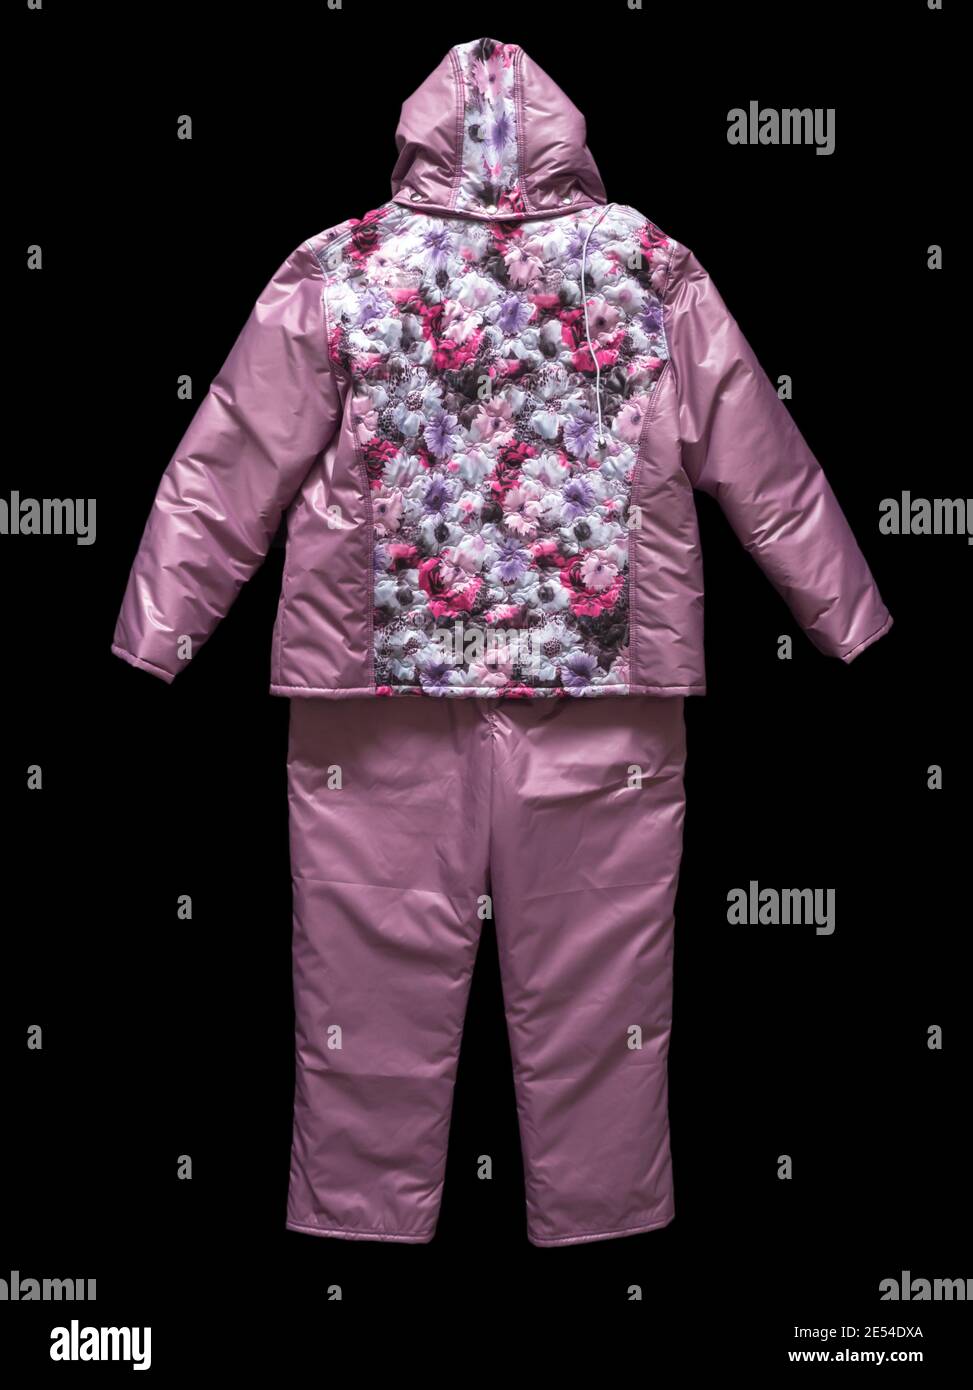 Women's boiler suit on a black background. Stock Photo